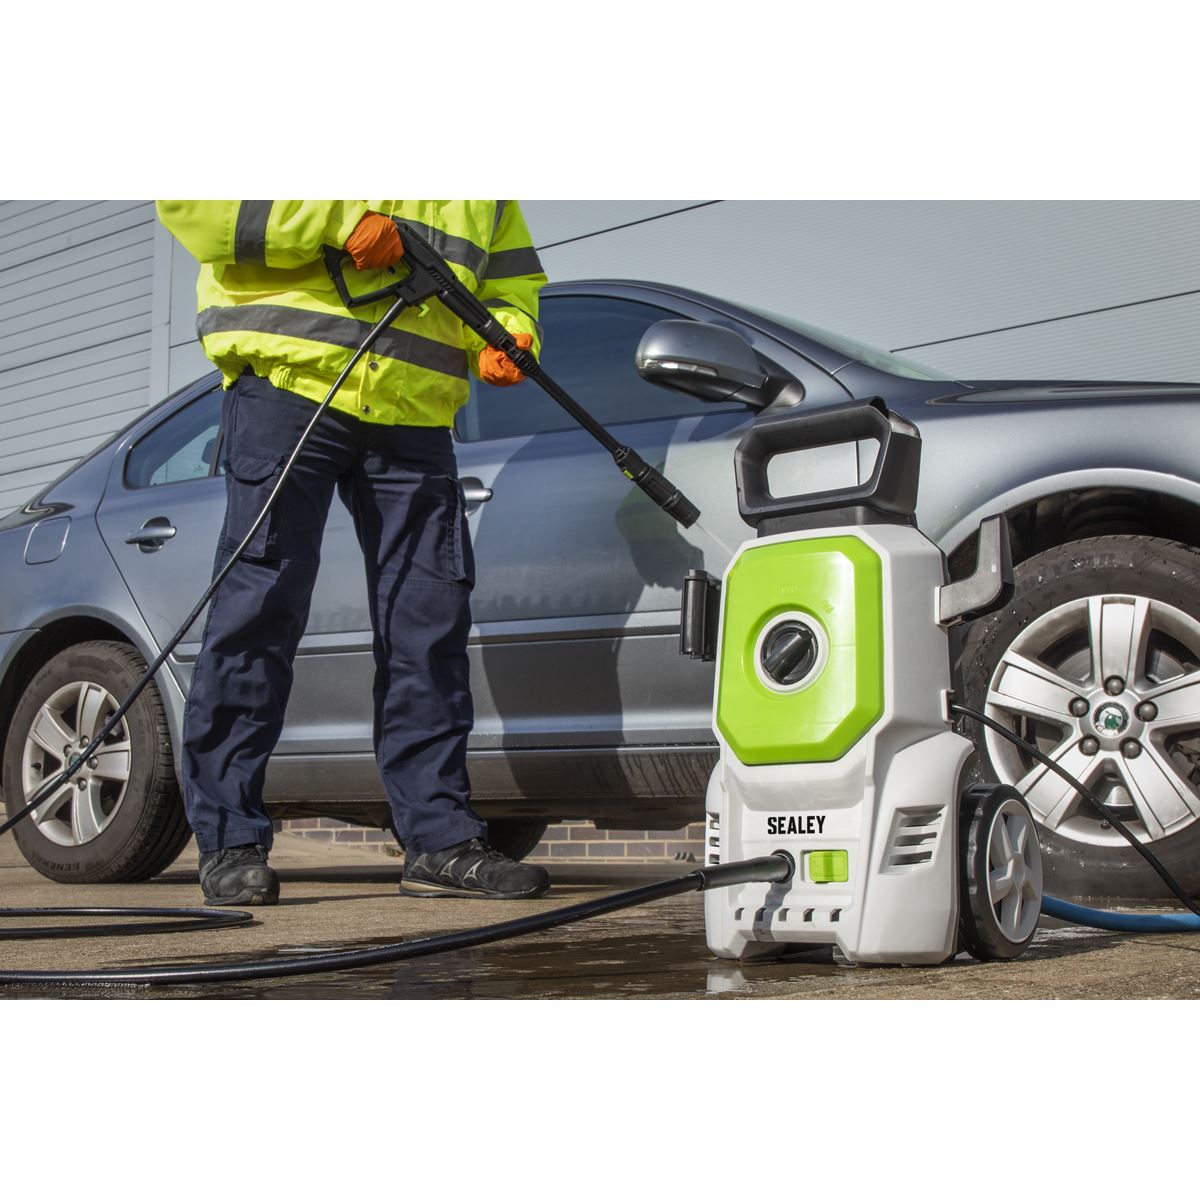 Sealey Pressure Washer 100bar 390L/hr with Snow Foam PW1610COMBO